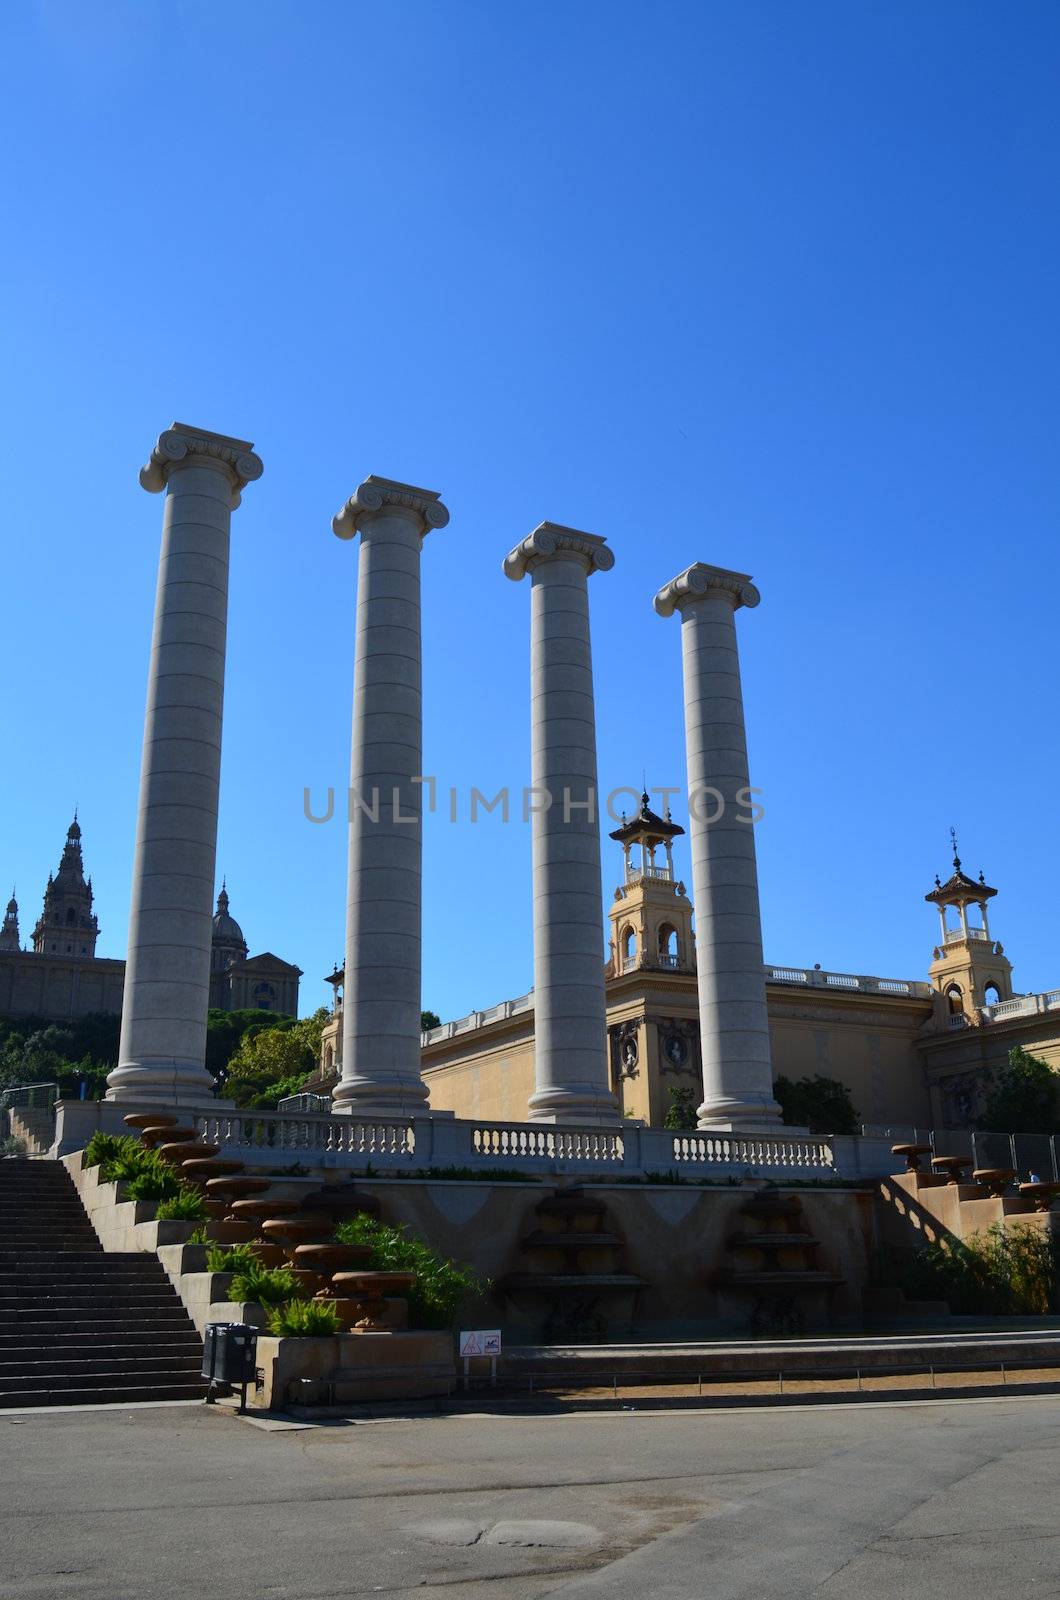 Four large pillars in front of the National Art Museum,Spain.